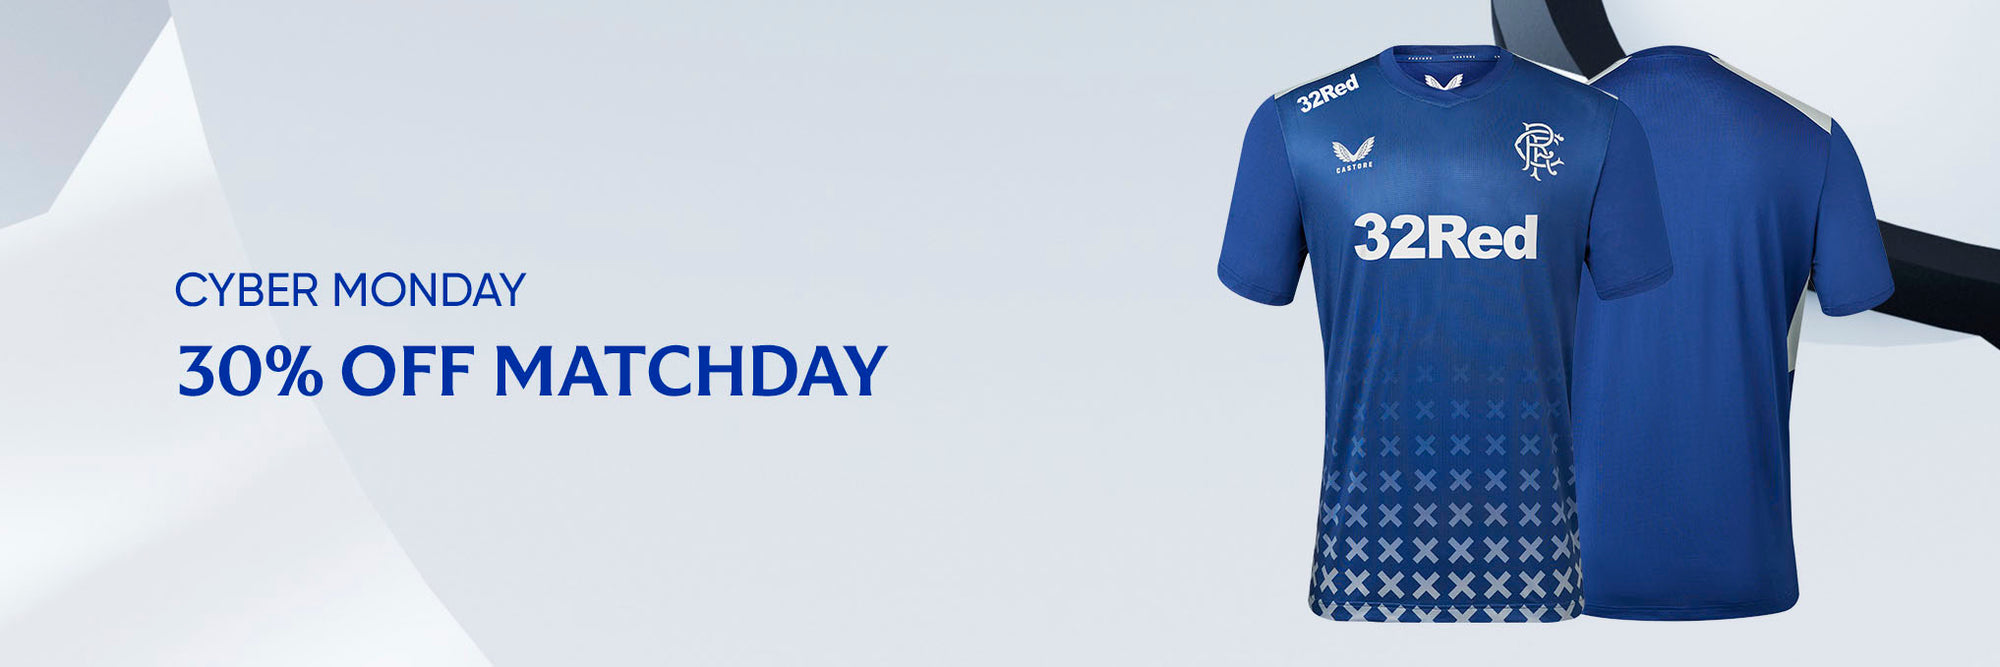 23/24 Cyber Monday - Matchday 30% OFF